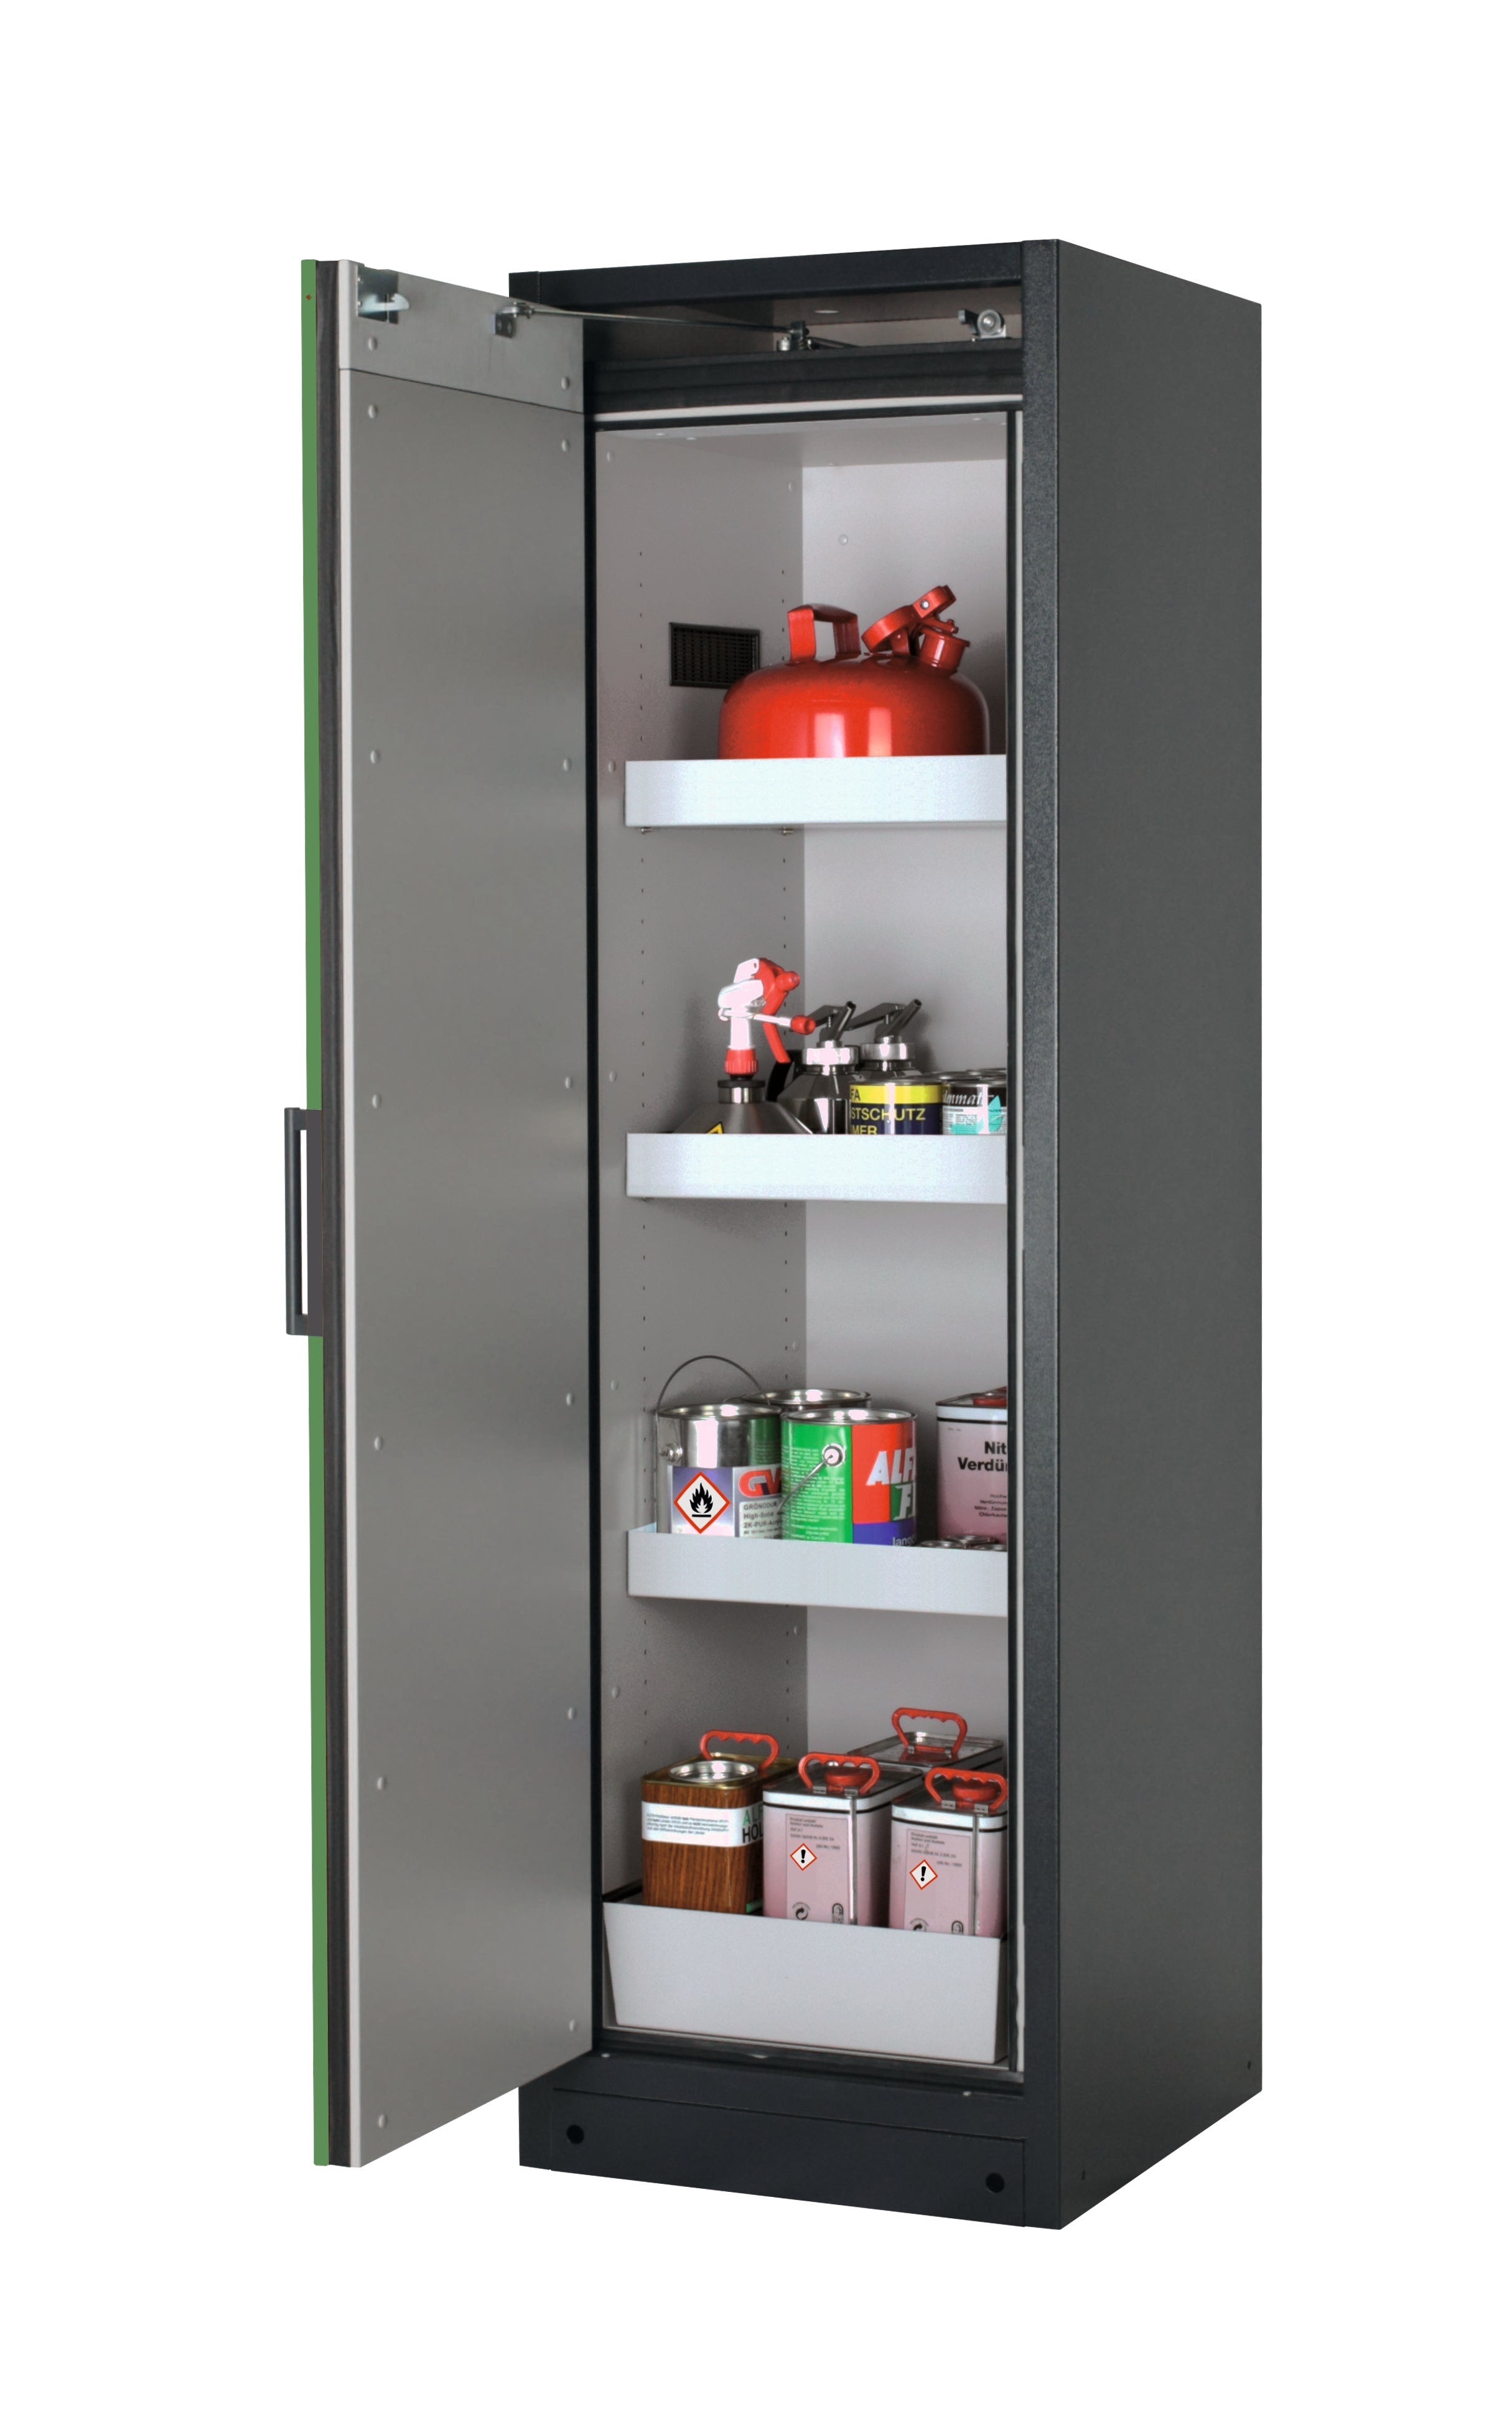 Type 90 safety storage cabinet Q-CLASSIC-90 model Q90.195.060 in reseda green RAL 6011 with 3x tray shelf (standard) (sheet steel),